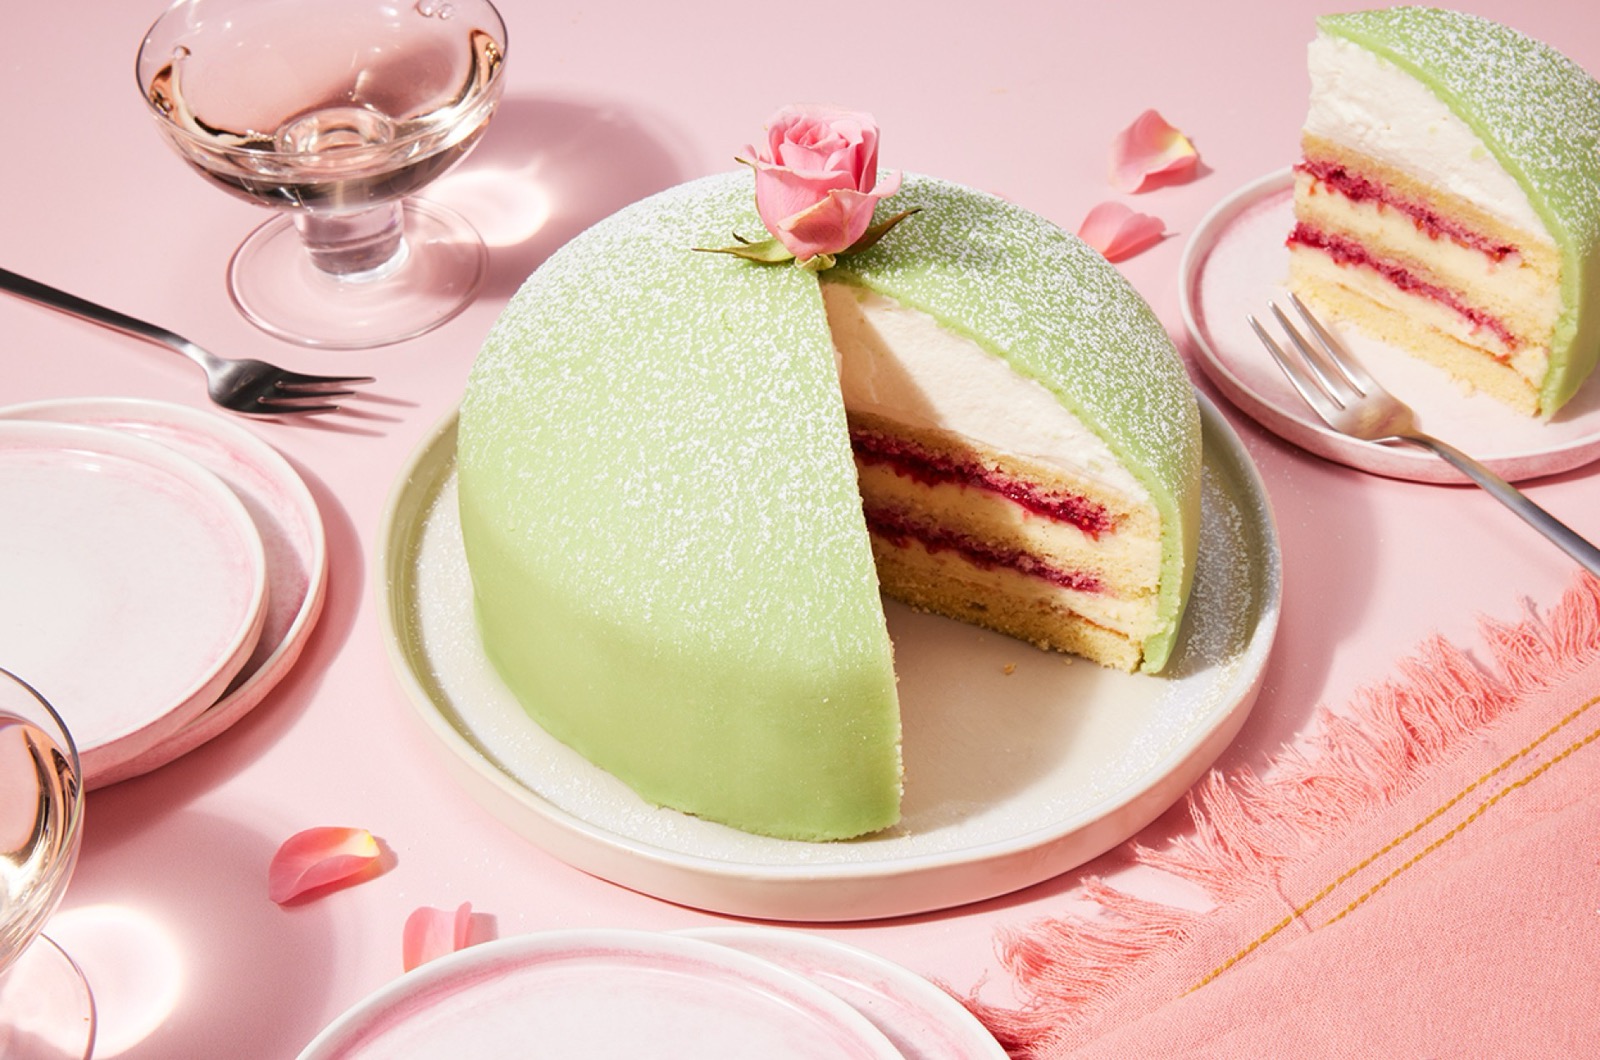 24 Trivia Quiz Questions & Answers From Museums To Superheroes Prinsesstarta Princess Cake